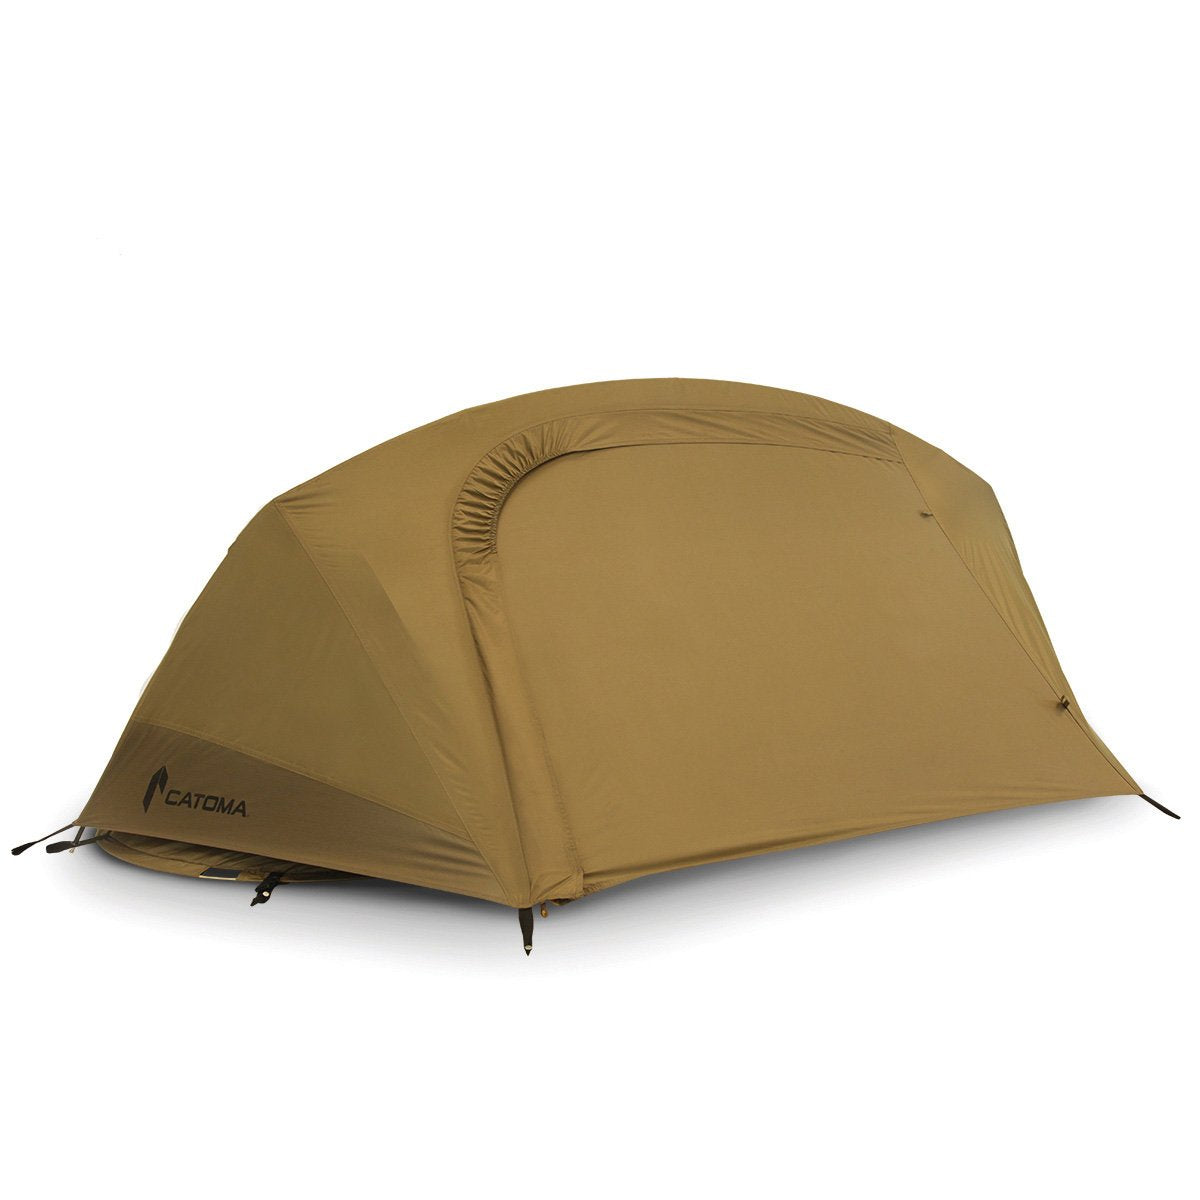 Photo of the side view of the Catoma Wolverine tent in a white background.